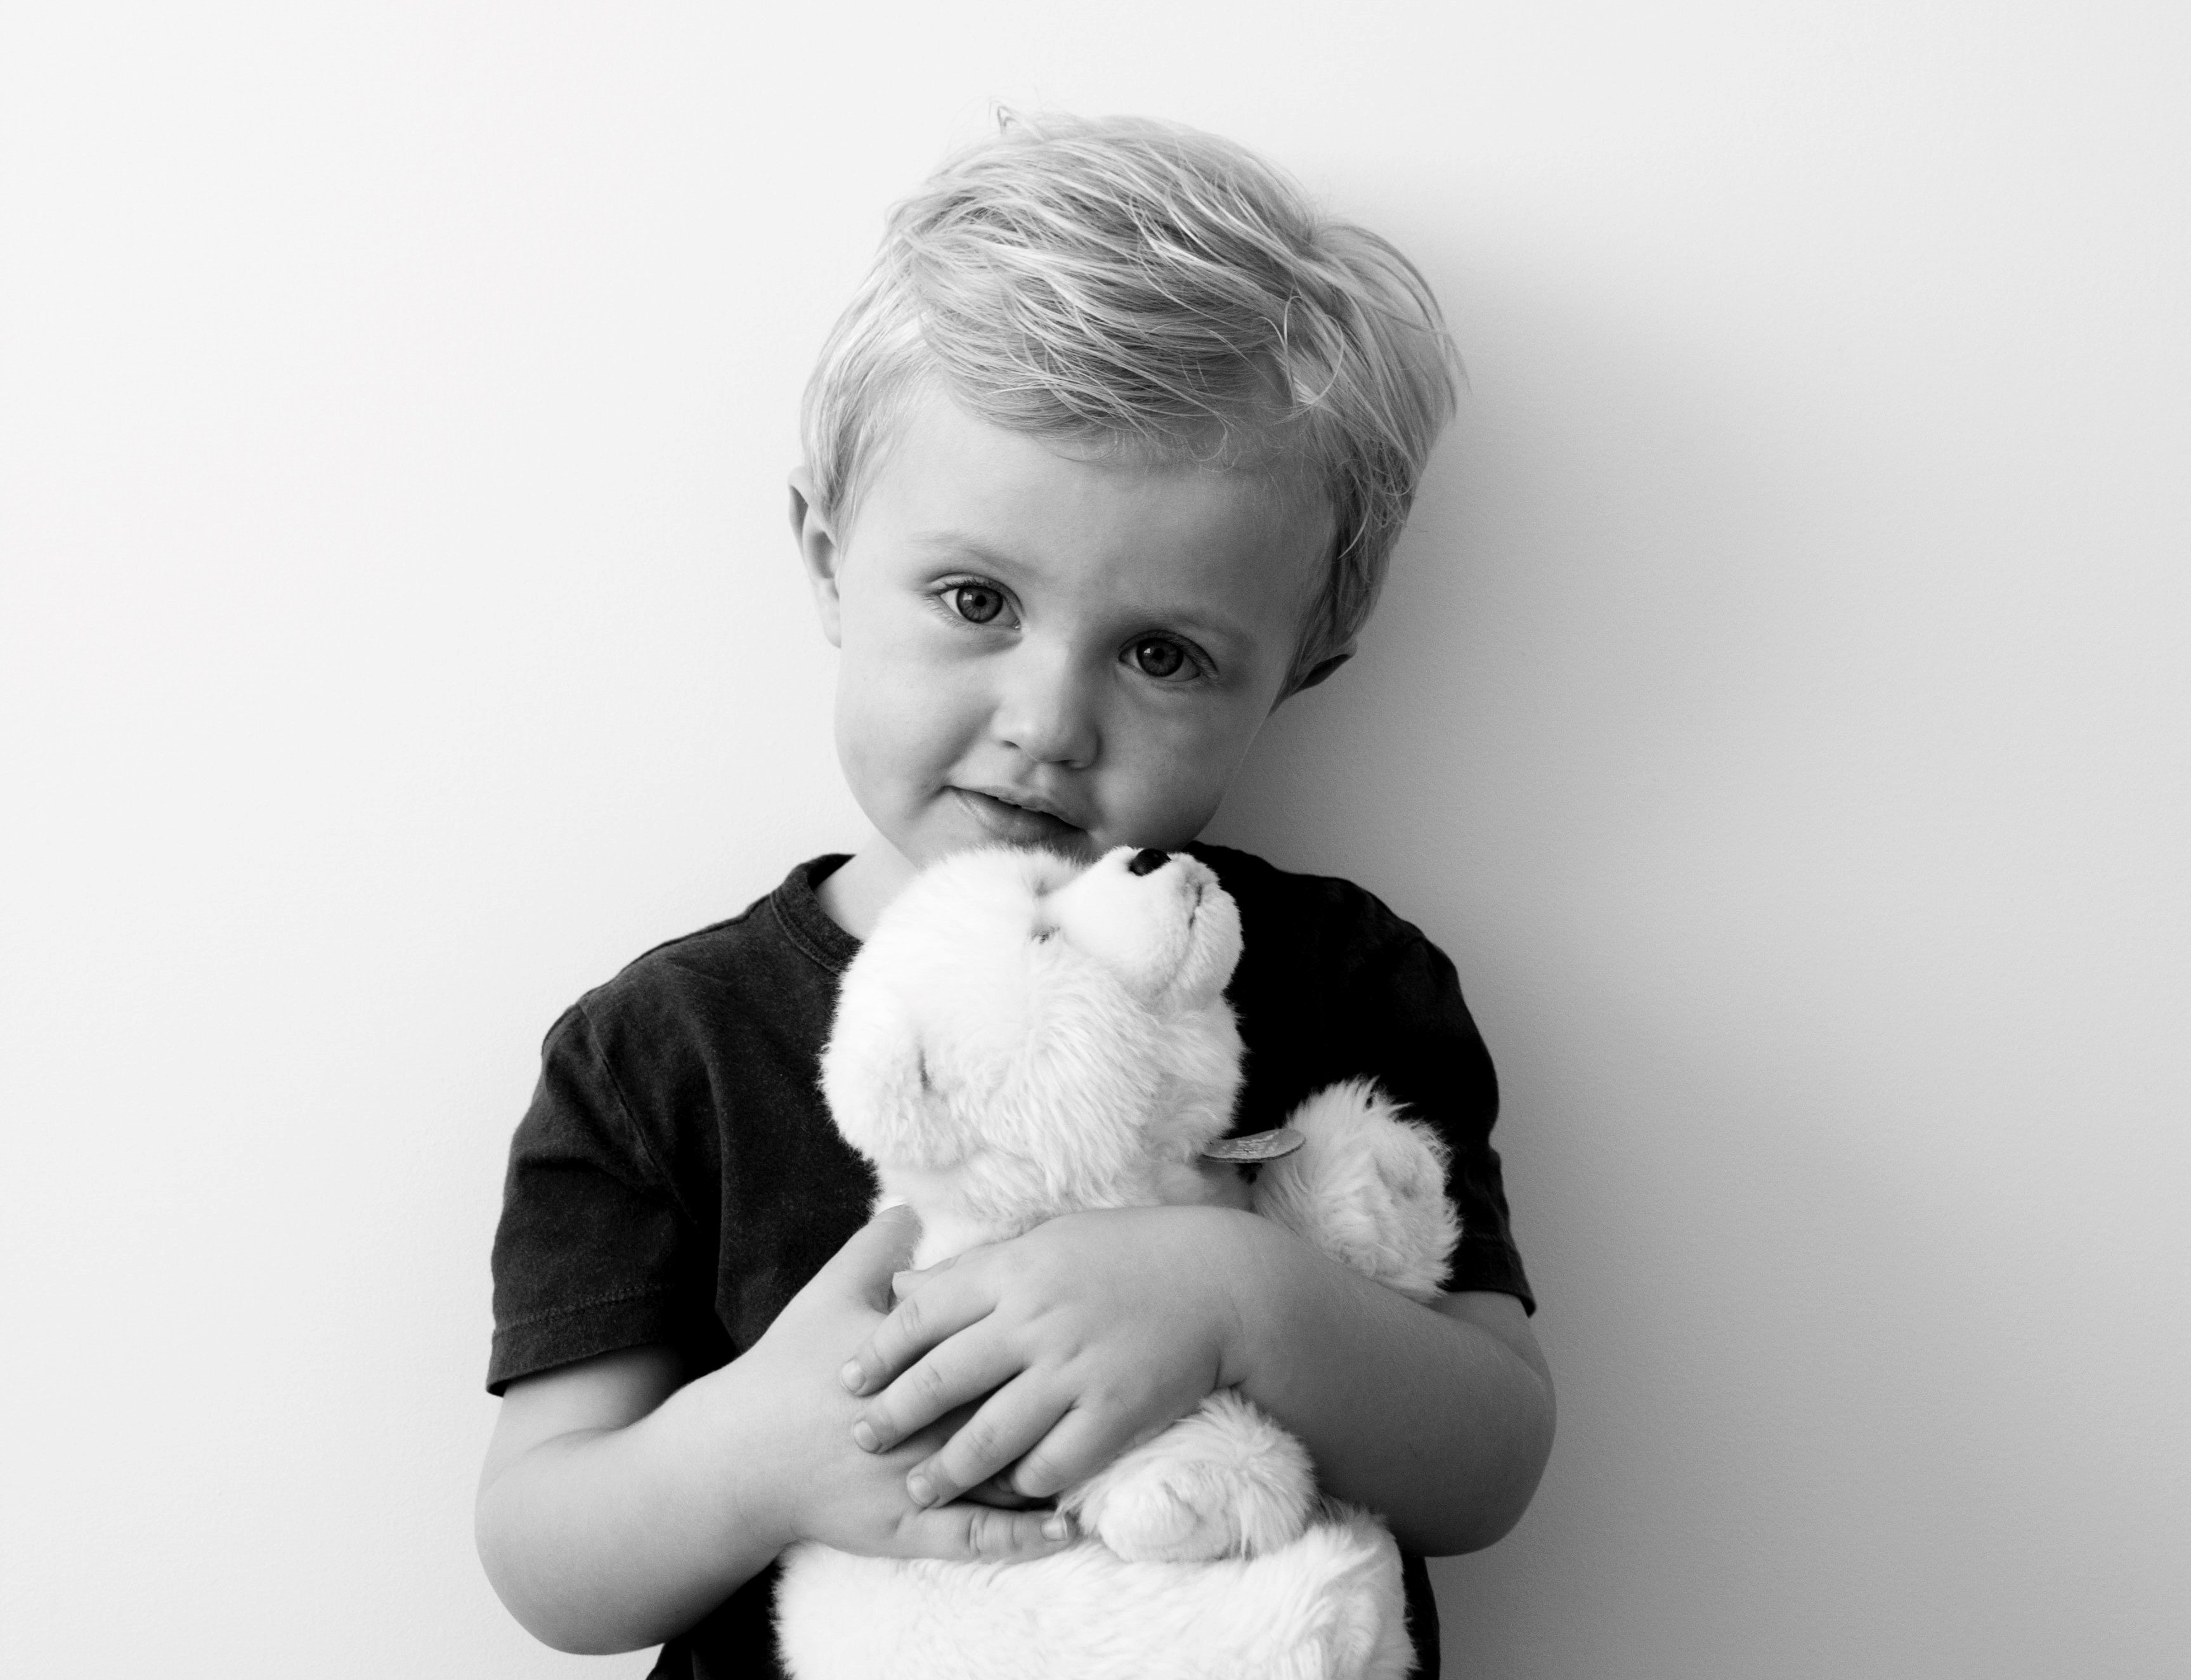 Mikey's grandmother gave him Mr. Squiggles when he was small. | Source: Unsplash